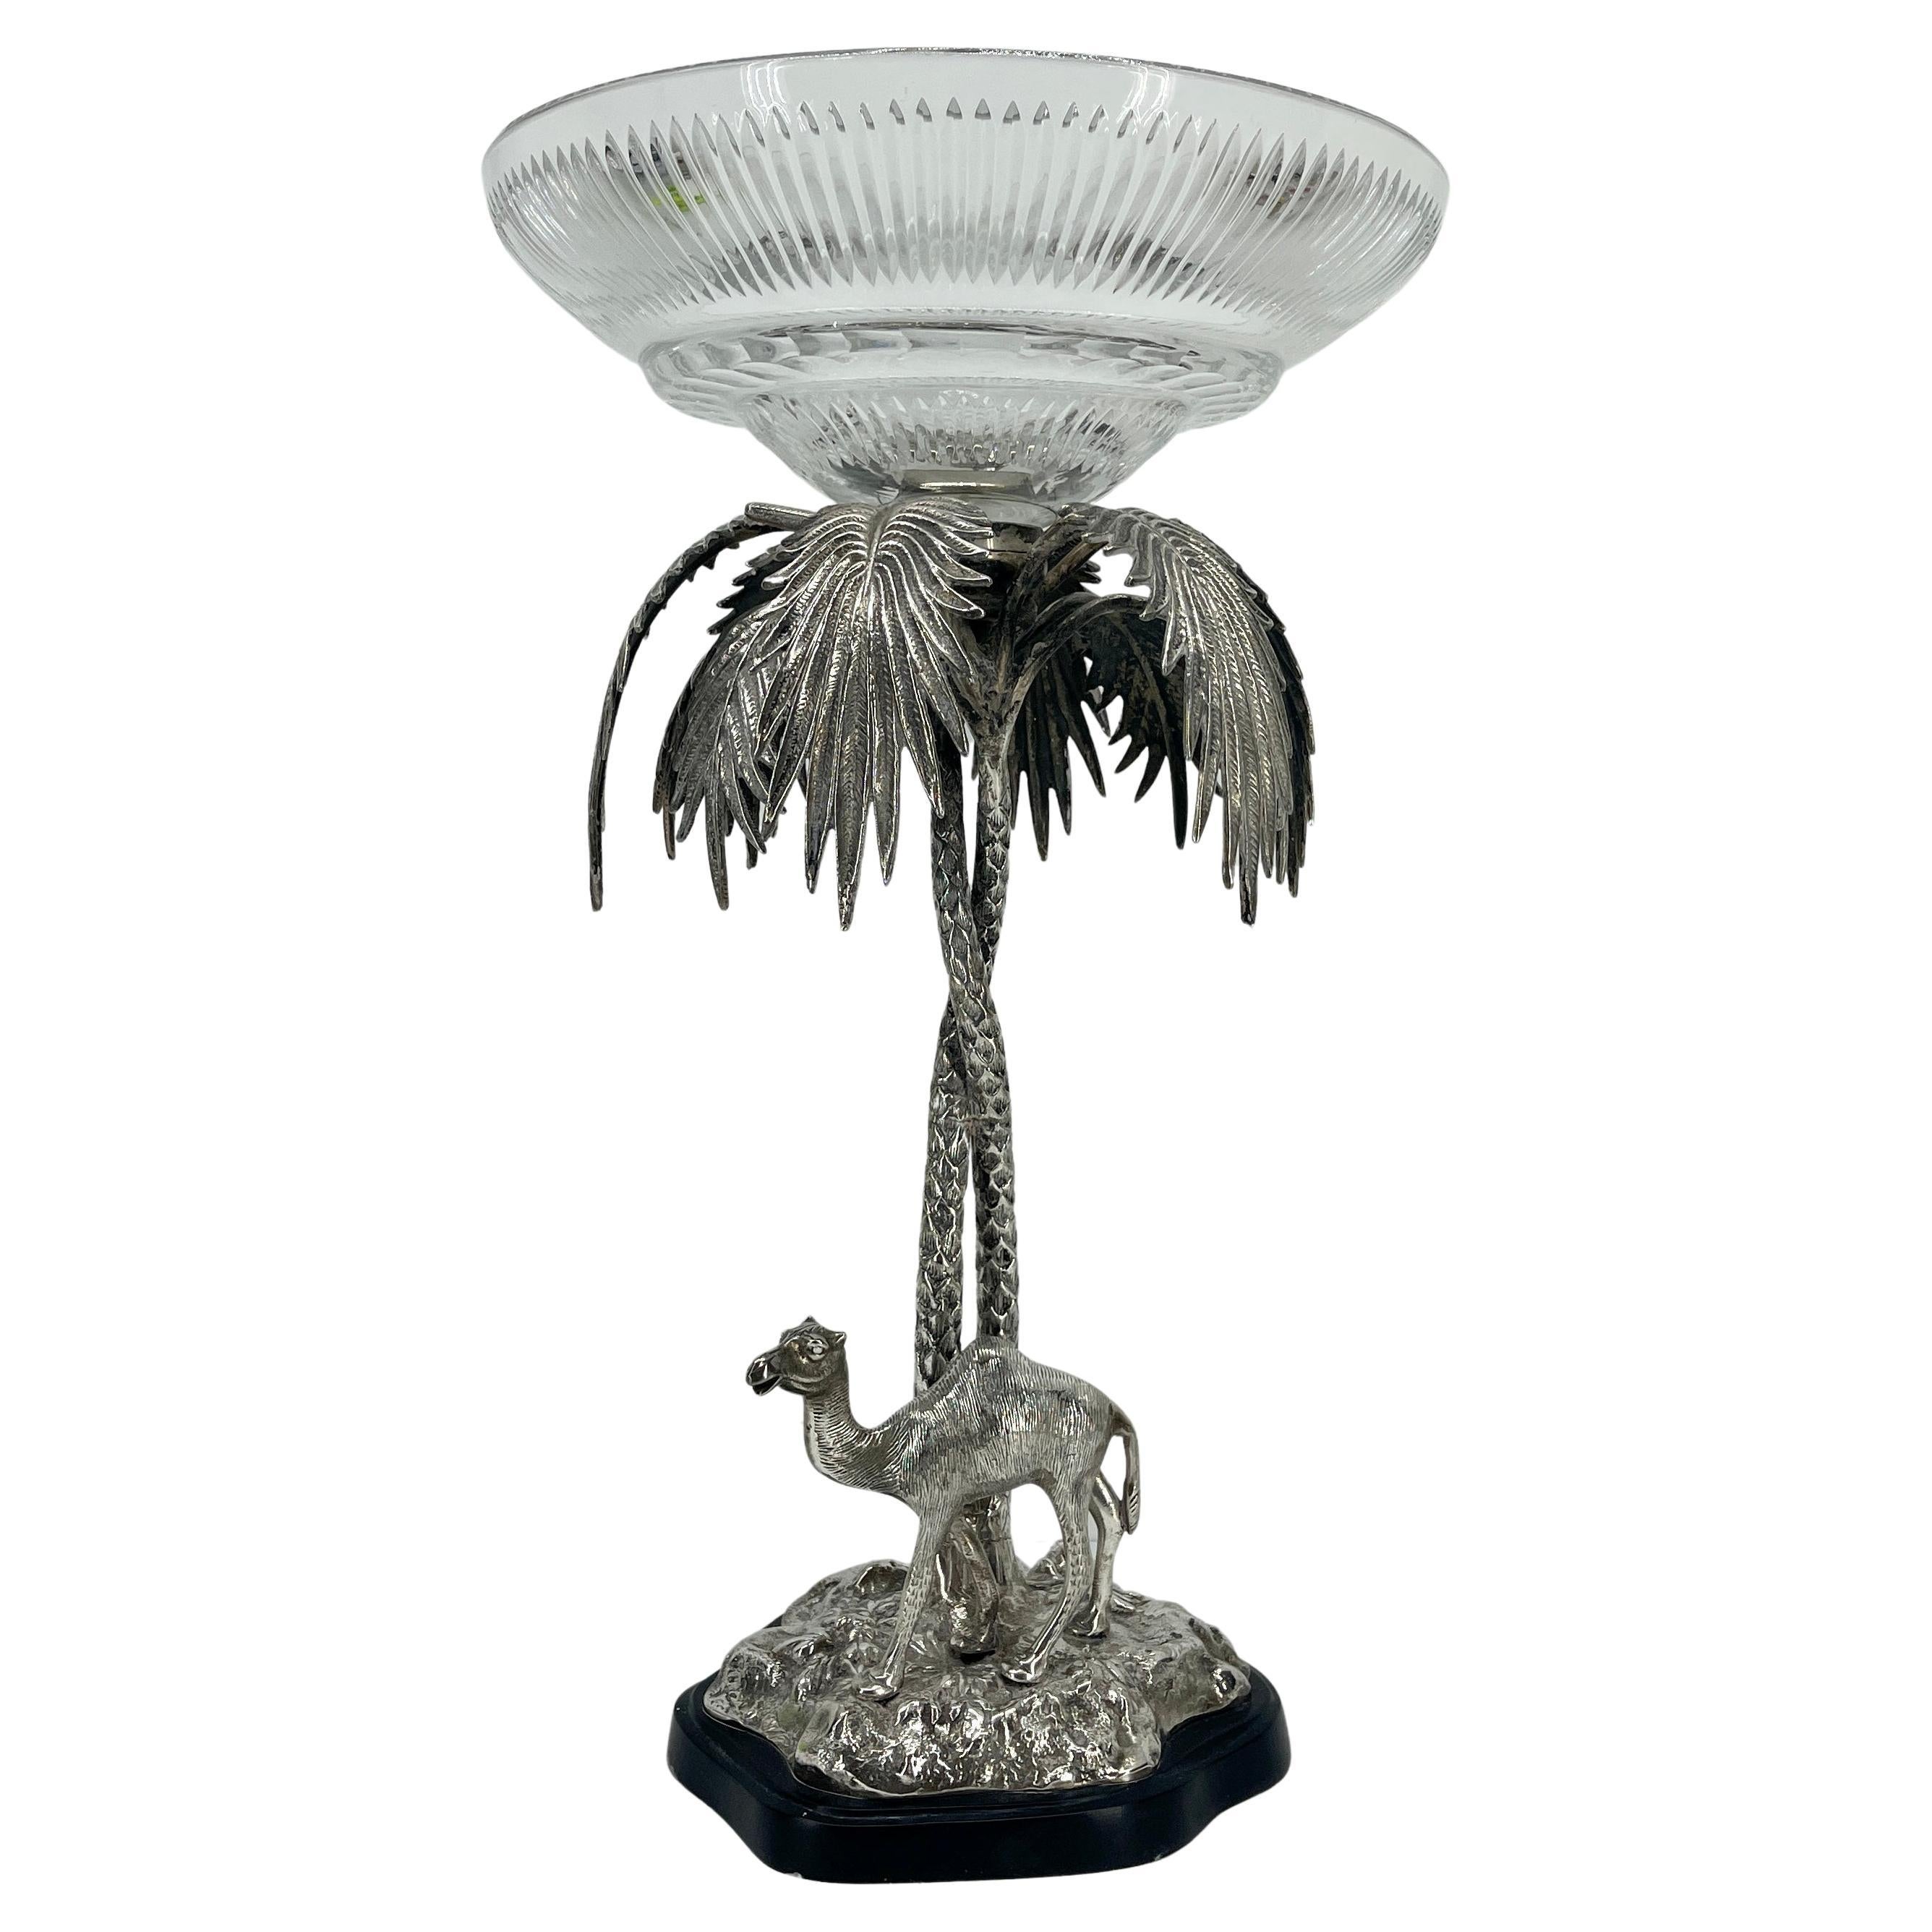 Large Elkington Epergne Centerpiece With Camel, Palm Tree and Glass Bowl For Sale